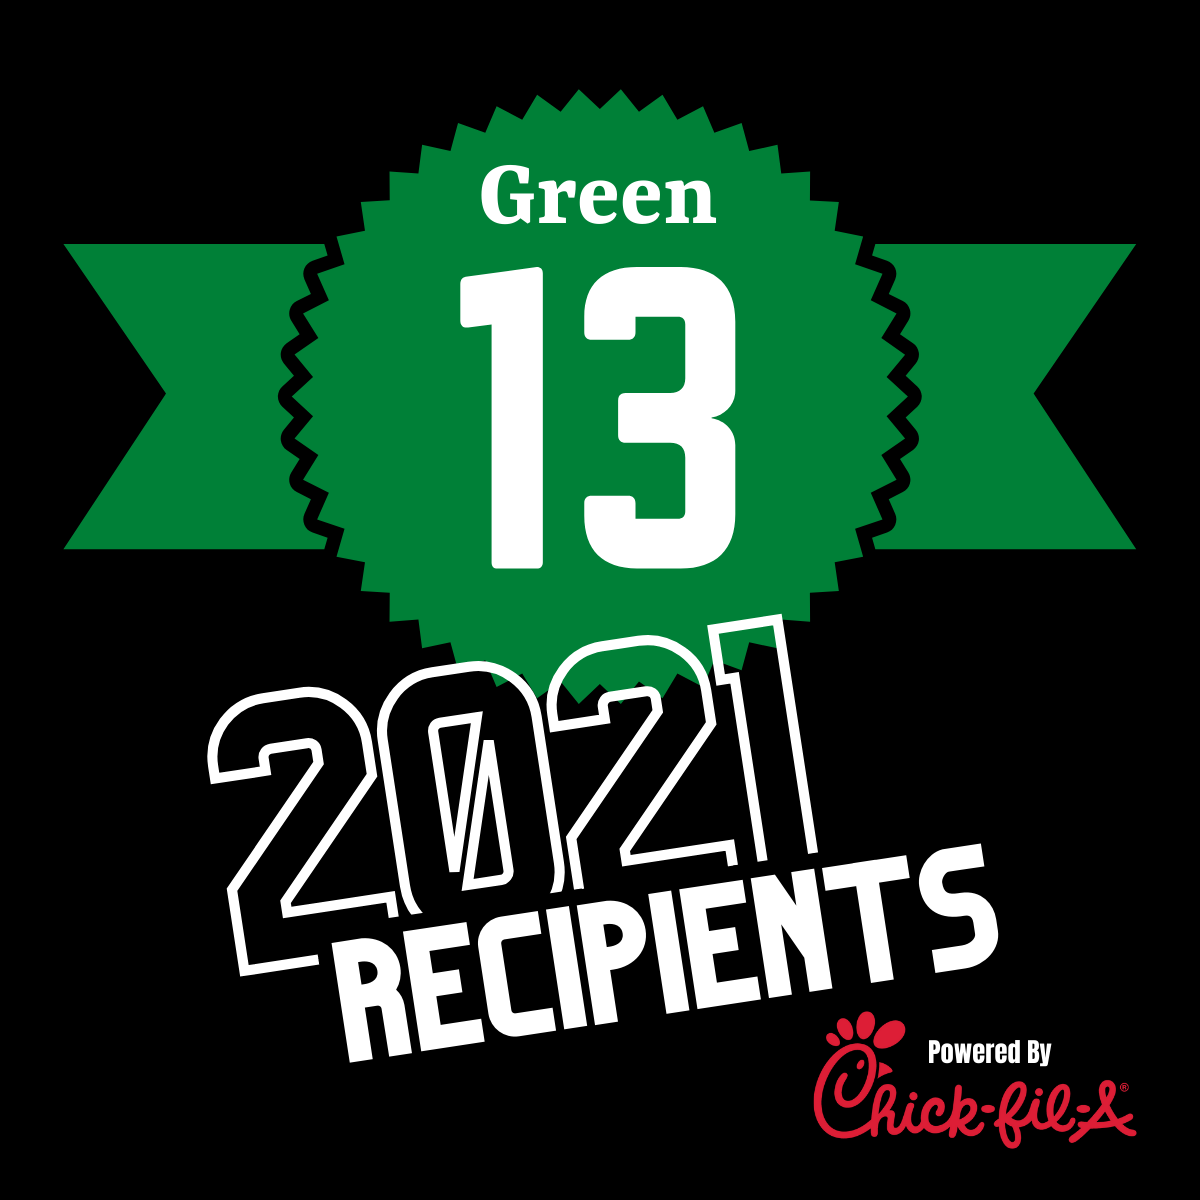 The 2021 Green 13